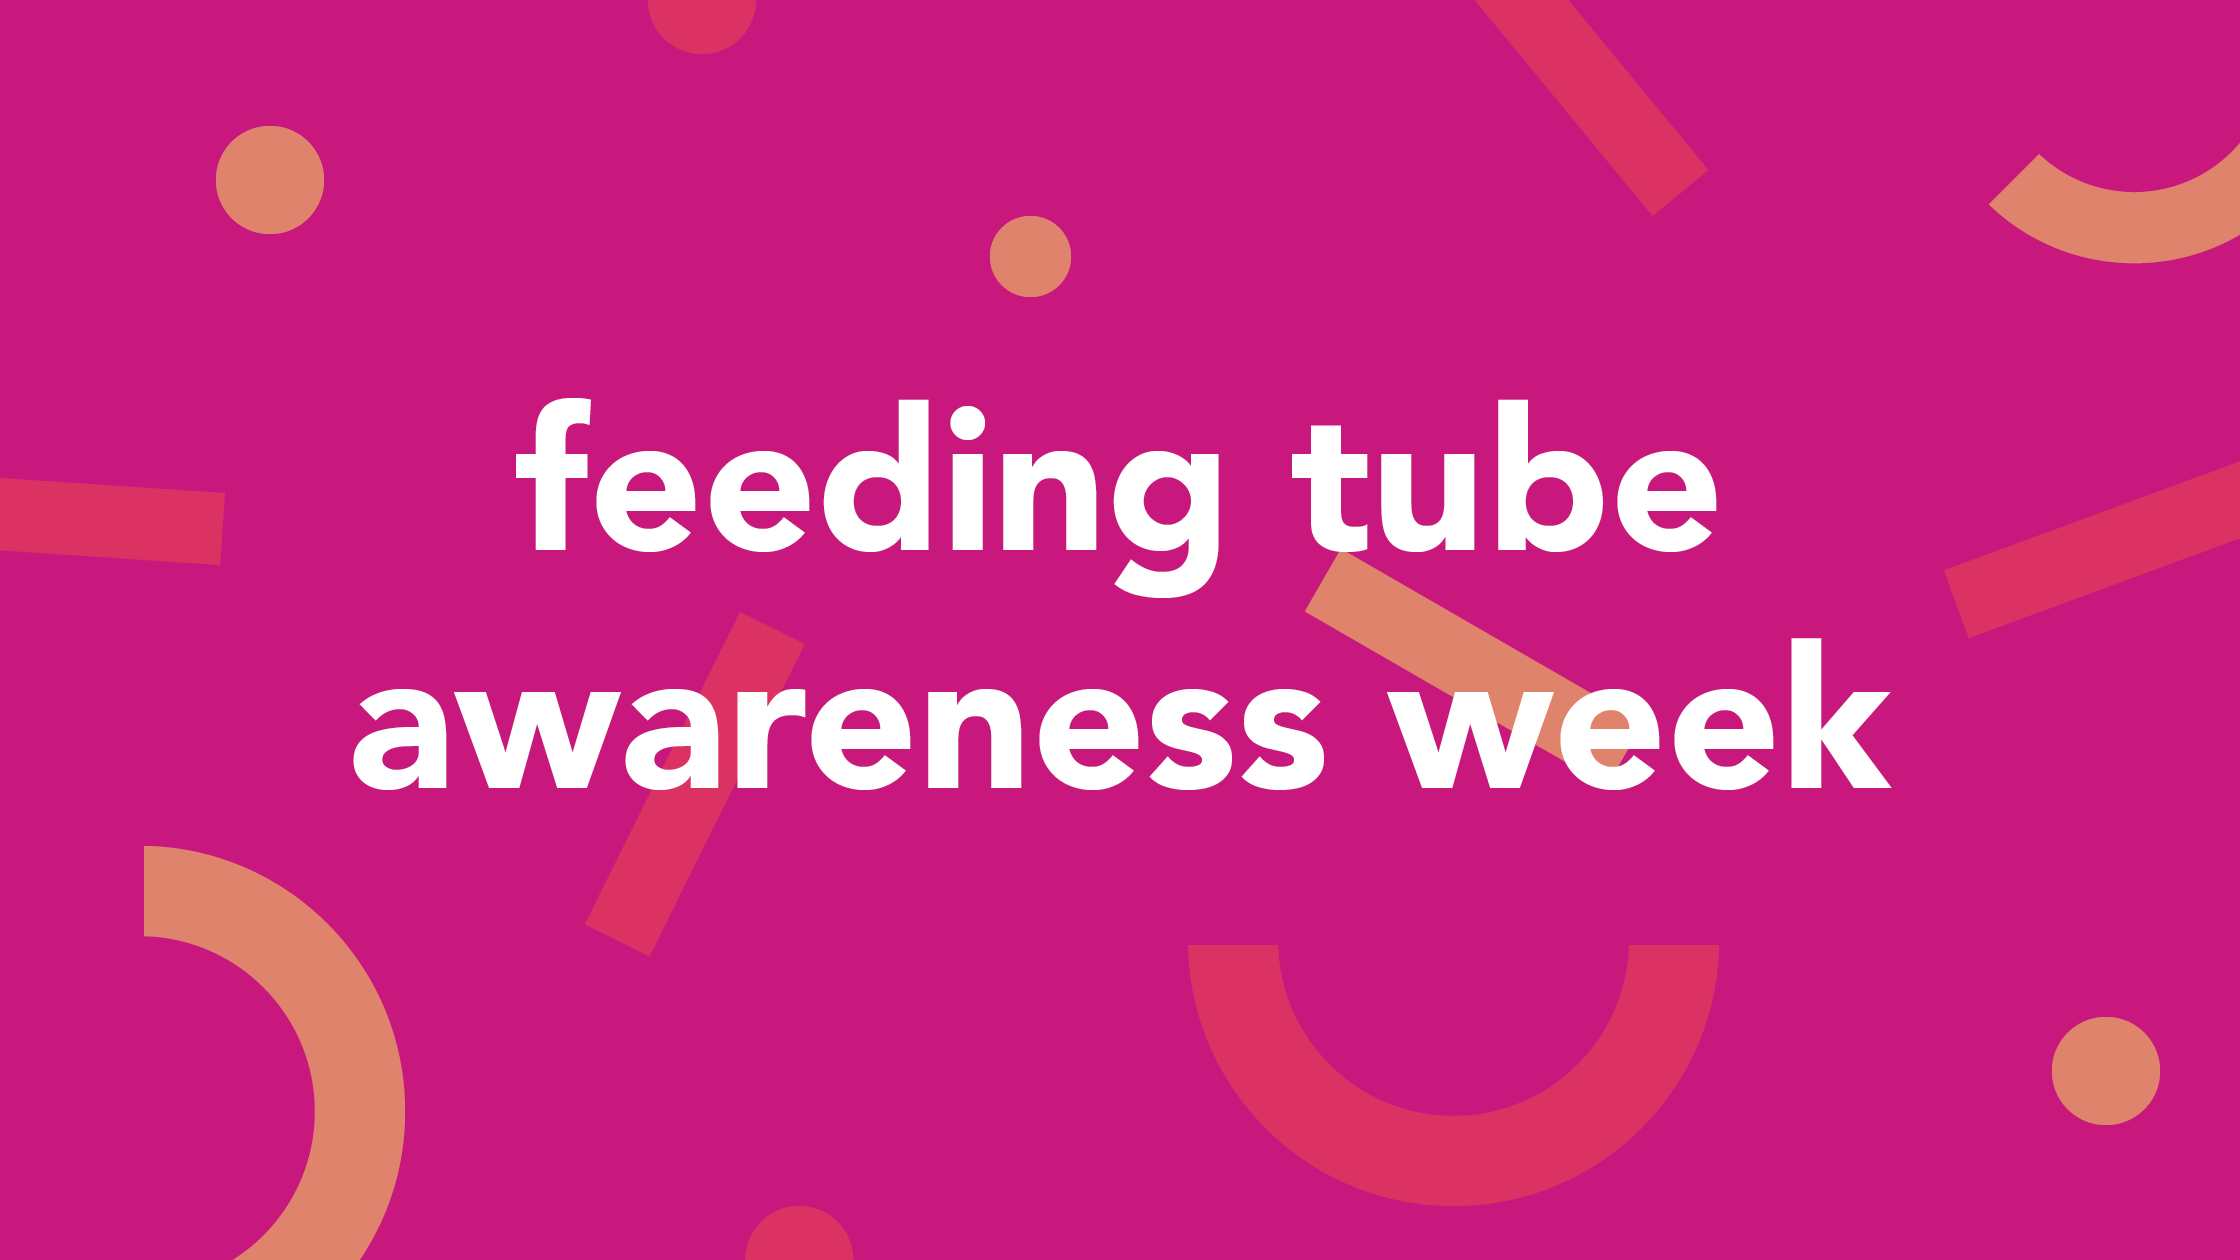 graphis with text "feeding tube awareness week" against pink squiggle background